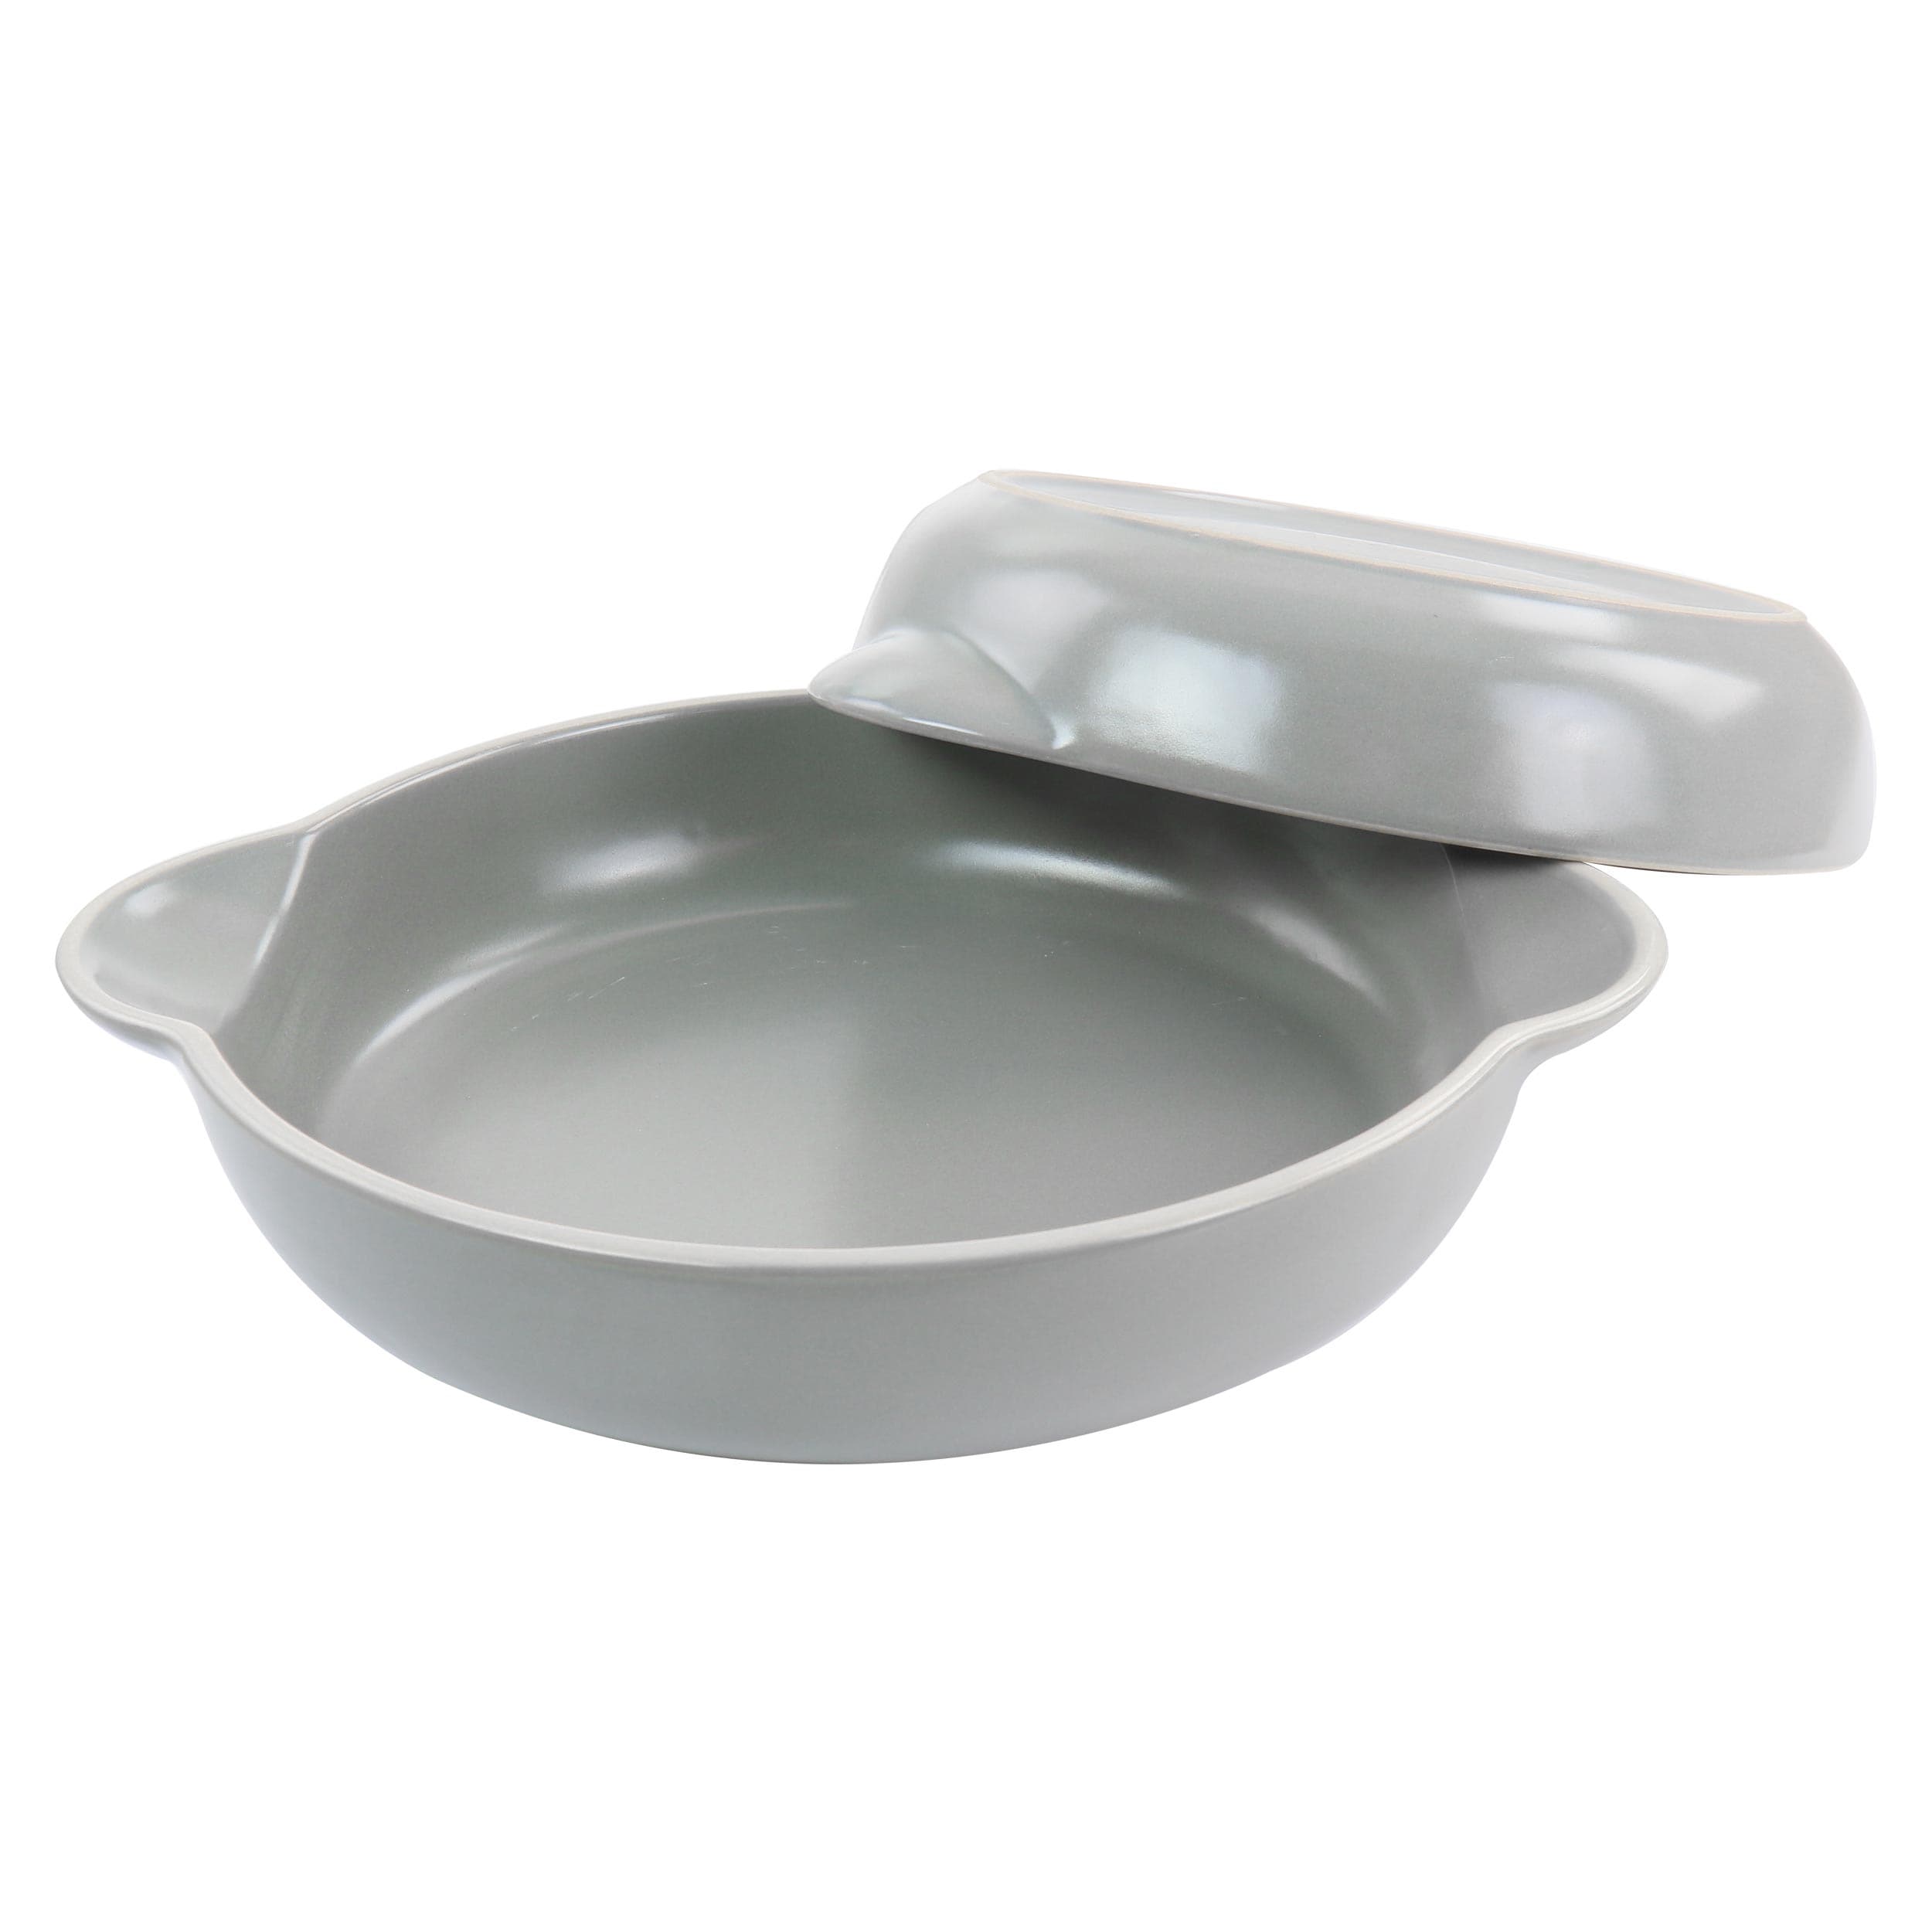 https://ak1.ostkcdn.com/images/products/is/images/direct/2ccefb832ad4d839c81fd80476826ea1c2c57fce/Gibson-Home-Rockaway-2-Piece-Nesting-Bakeware-Bowl-Set.jpg